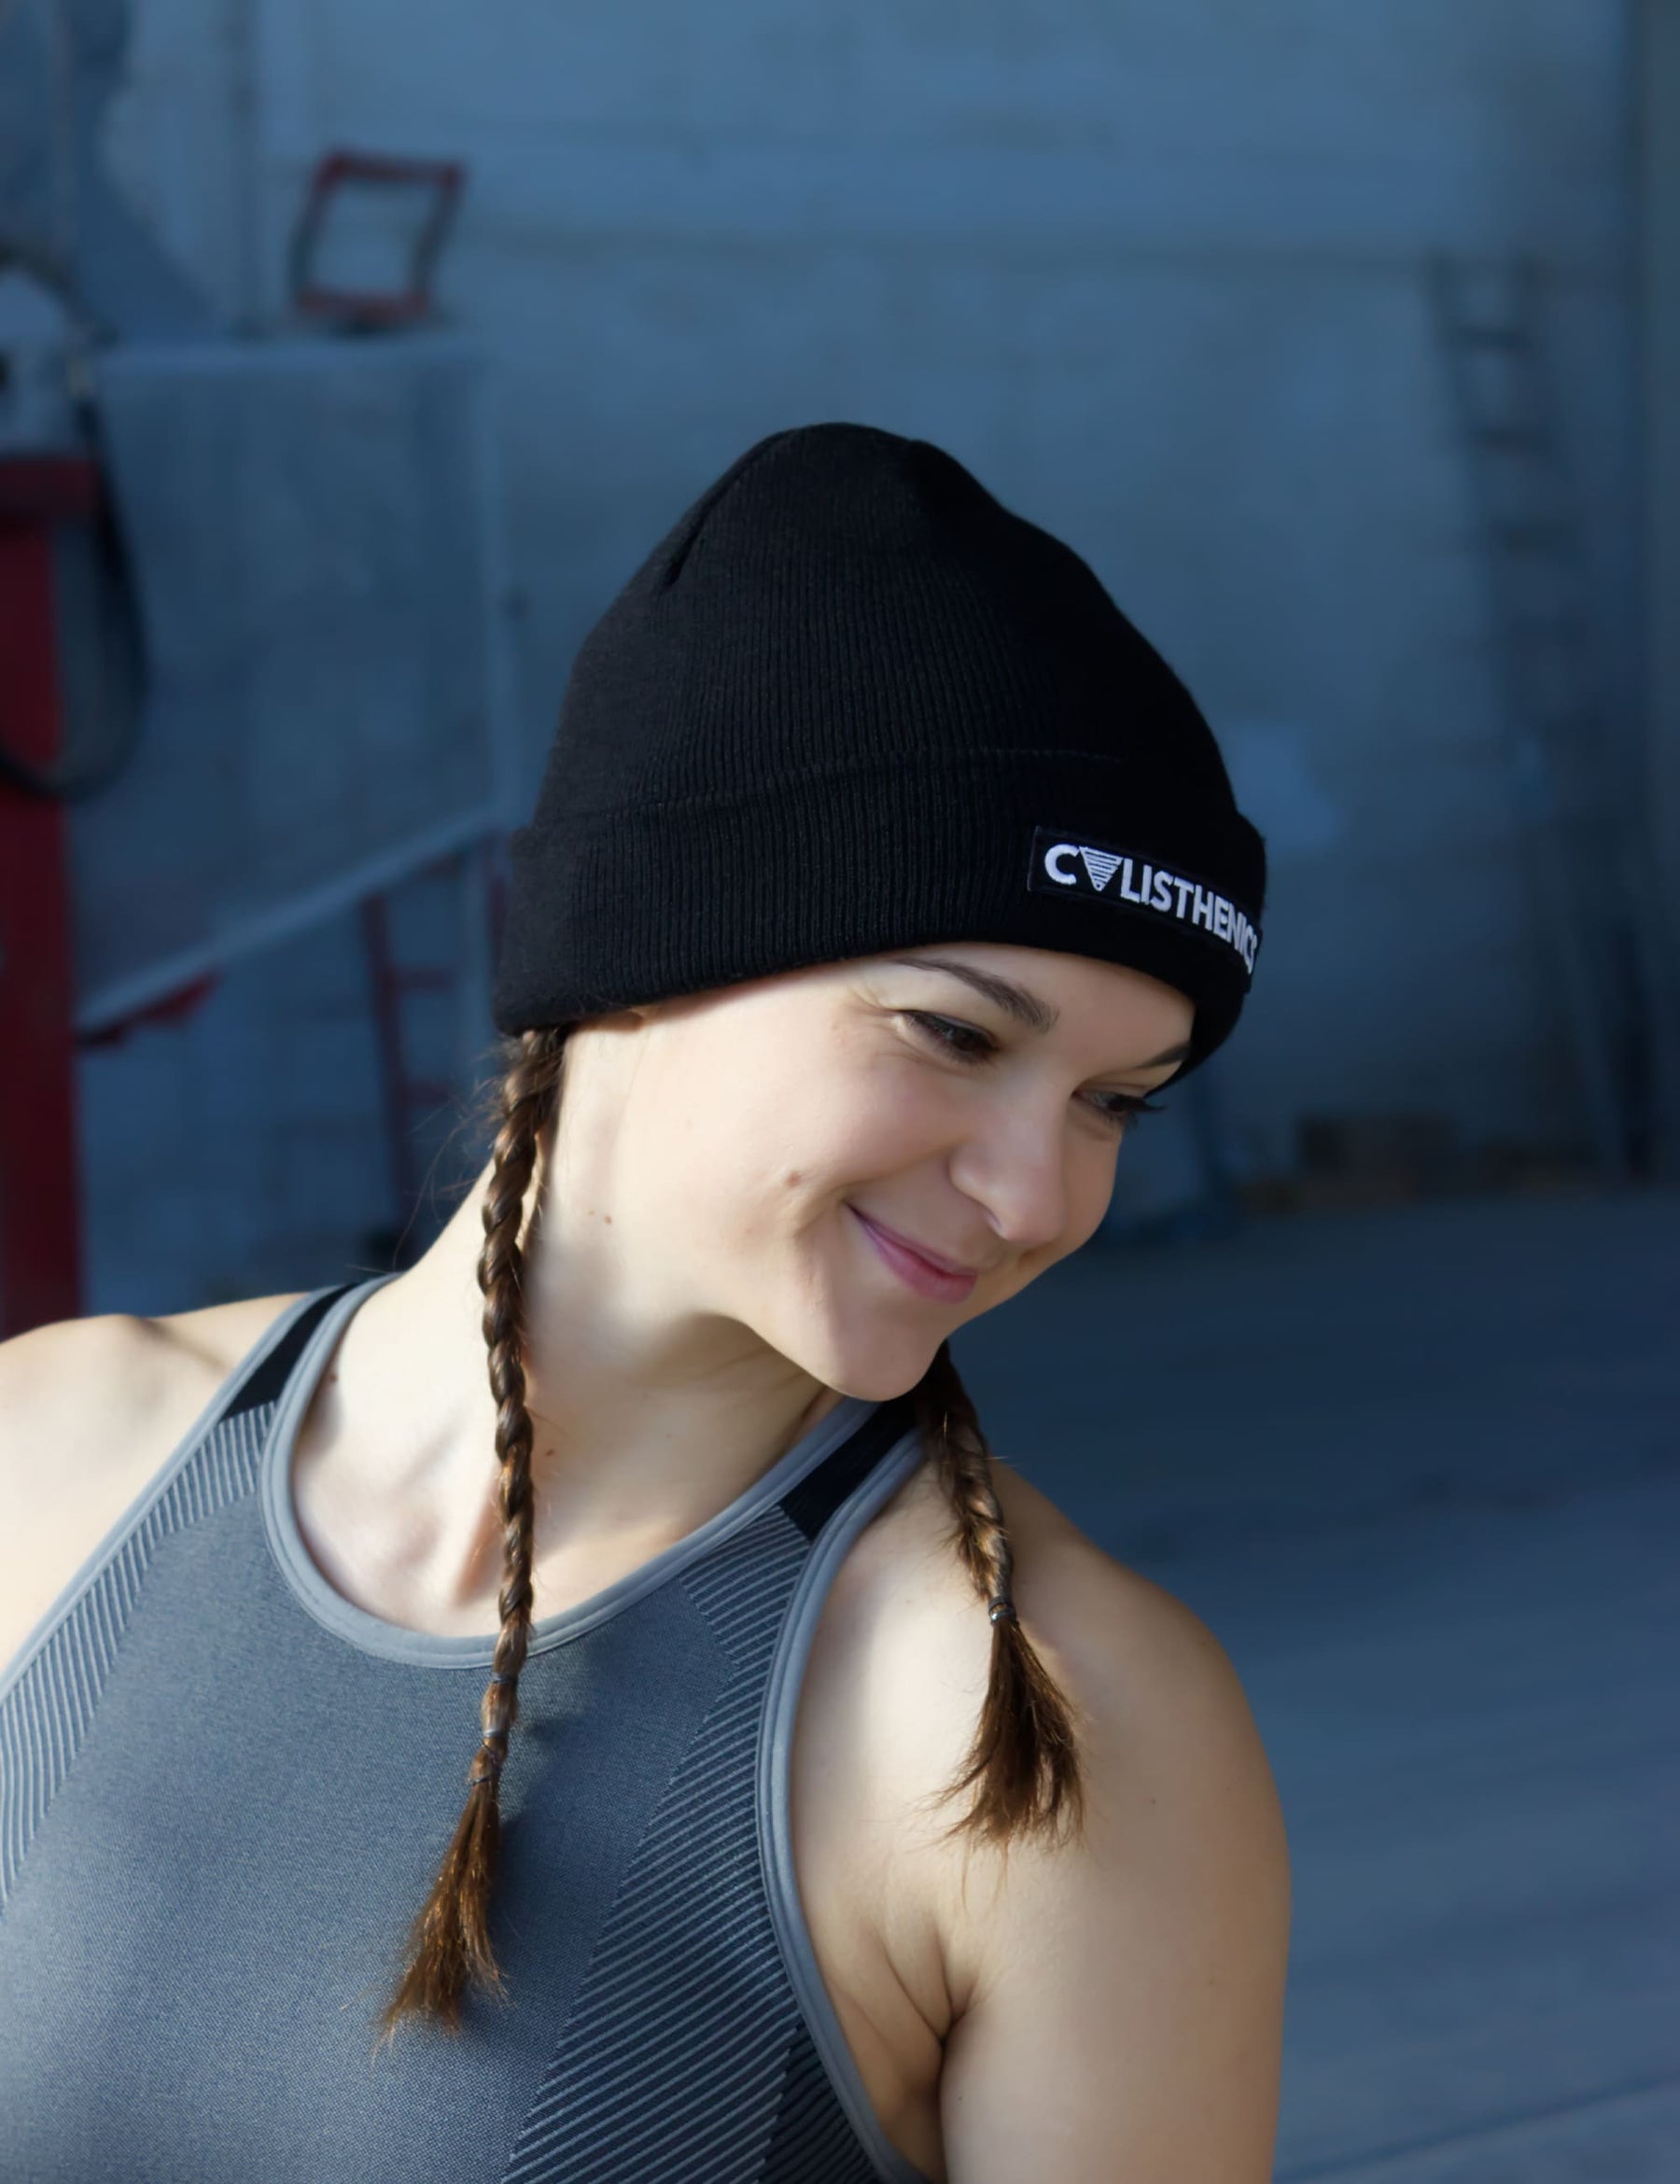 Calisthenics athlete Iris Easy wearing the black beanie with Calisthenics print and perfomance crop top by Gornation.